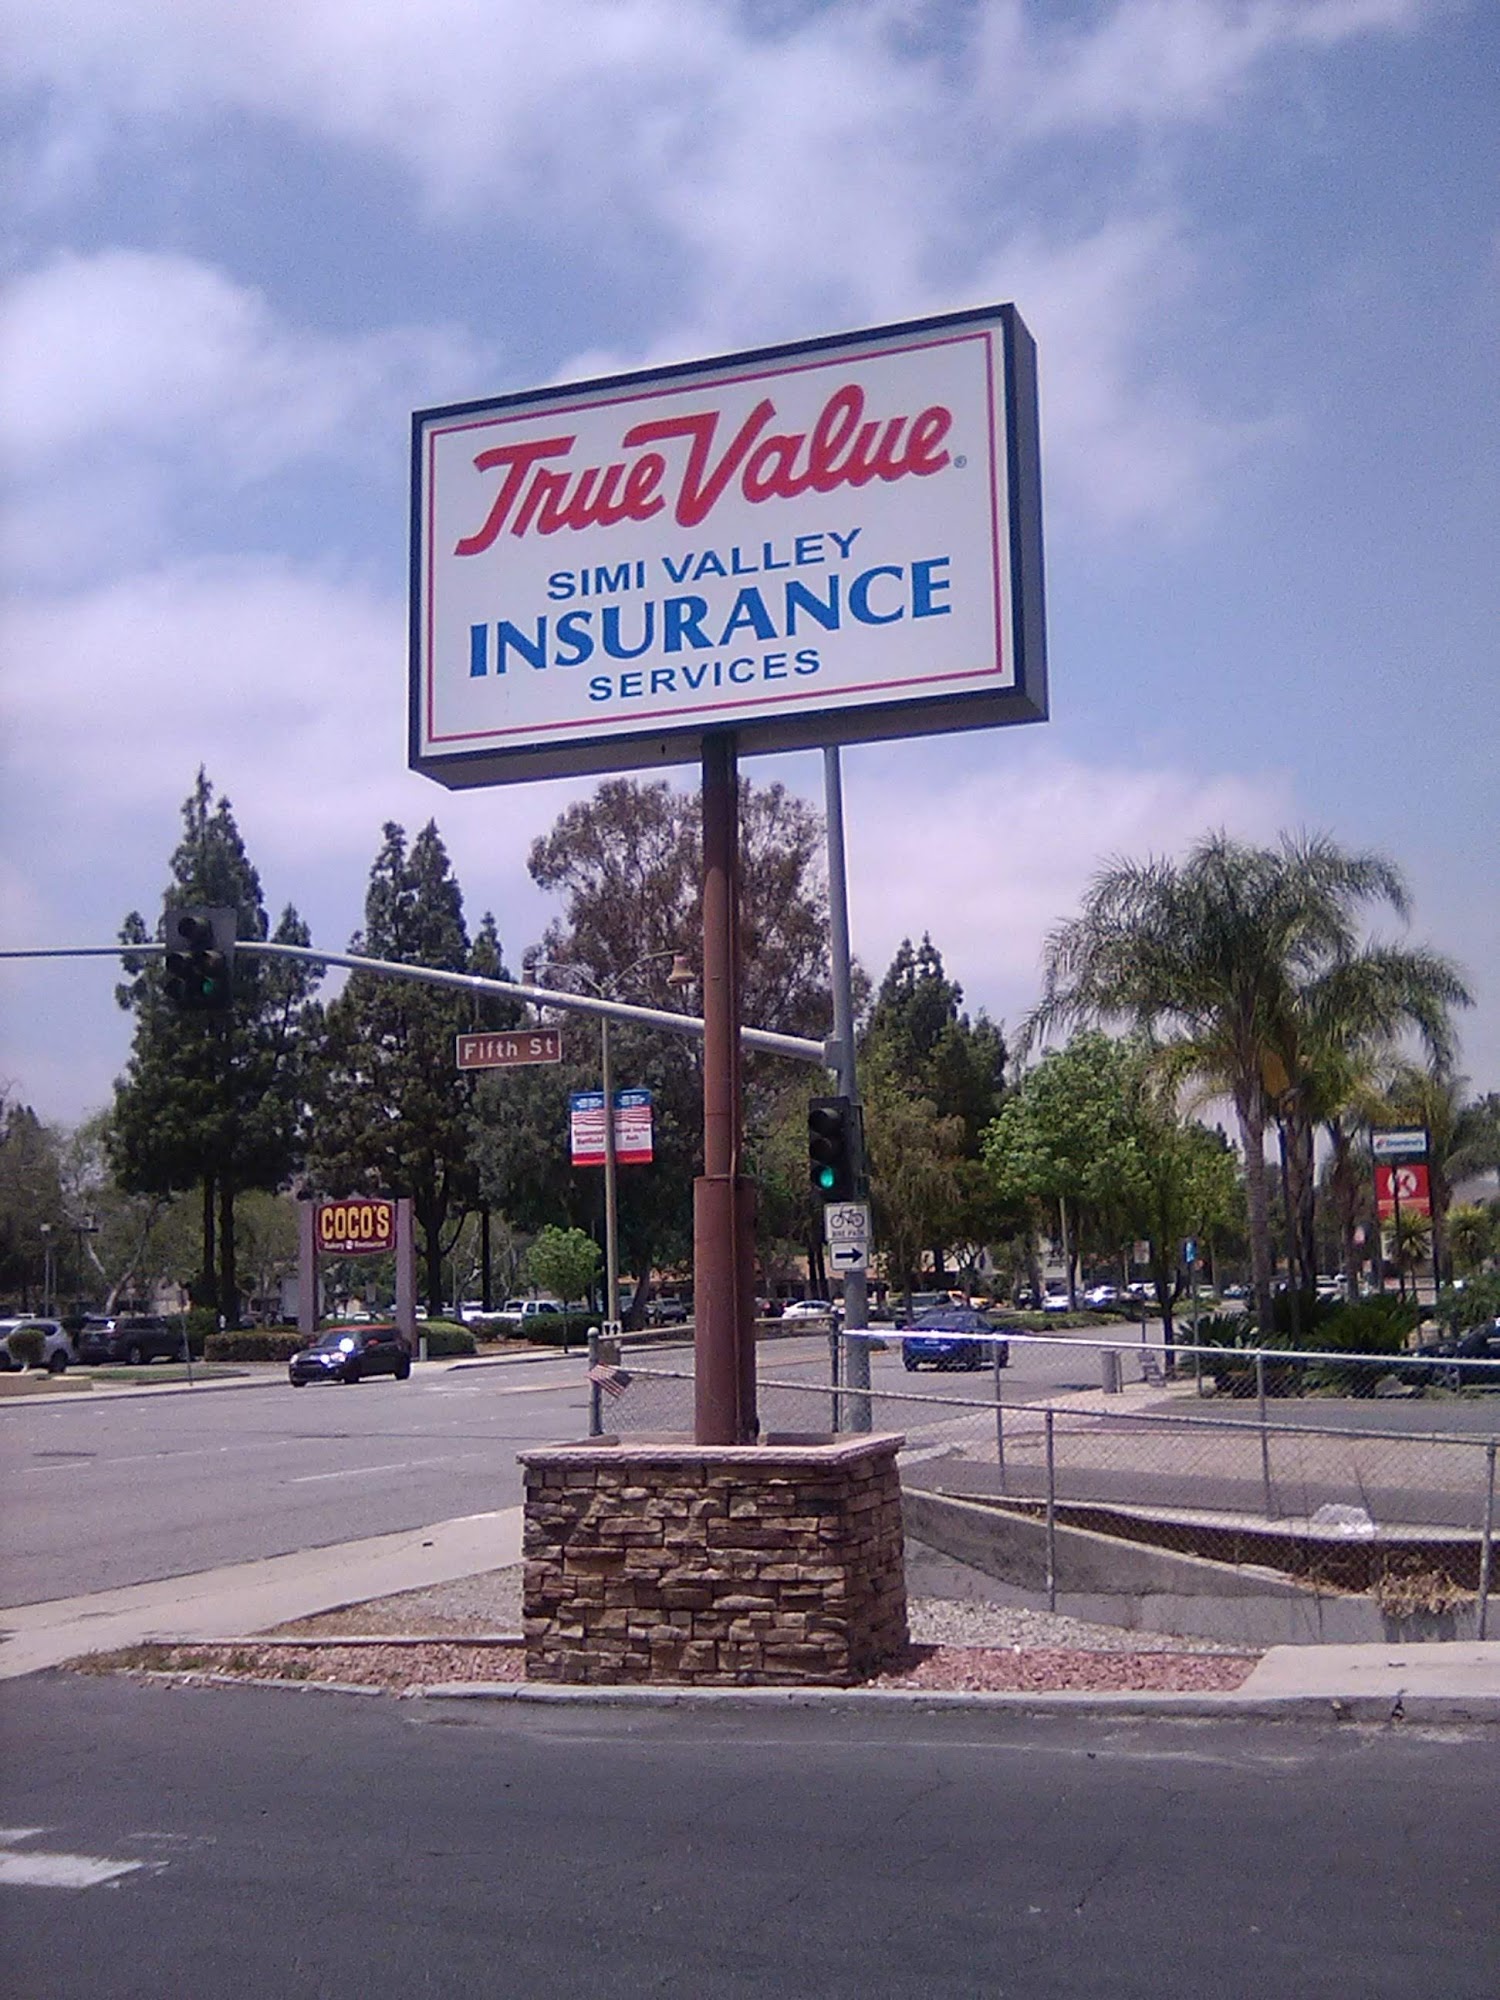 Simi Valley Insurance Services